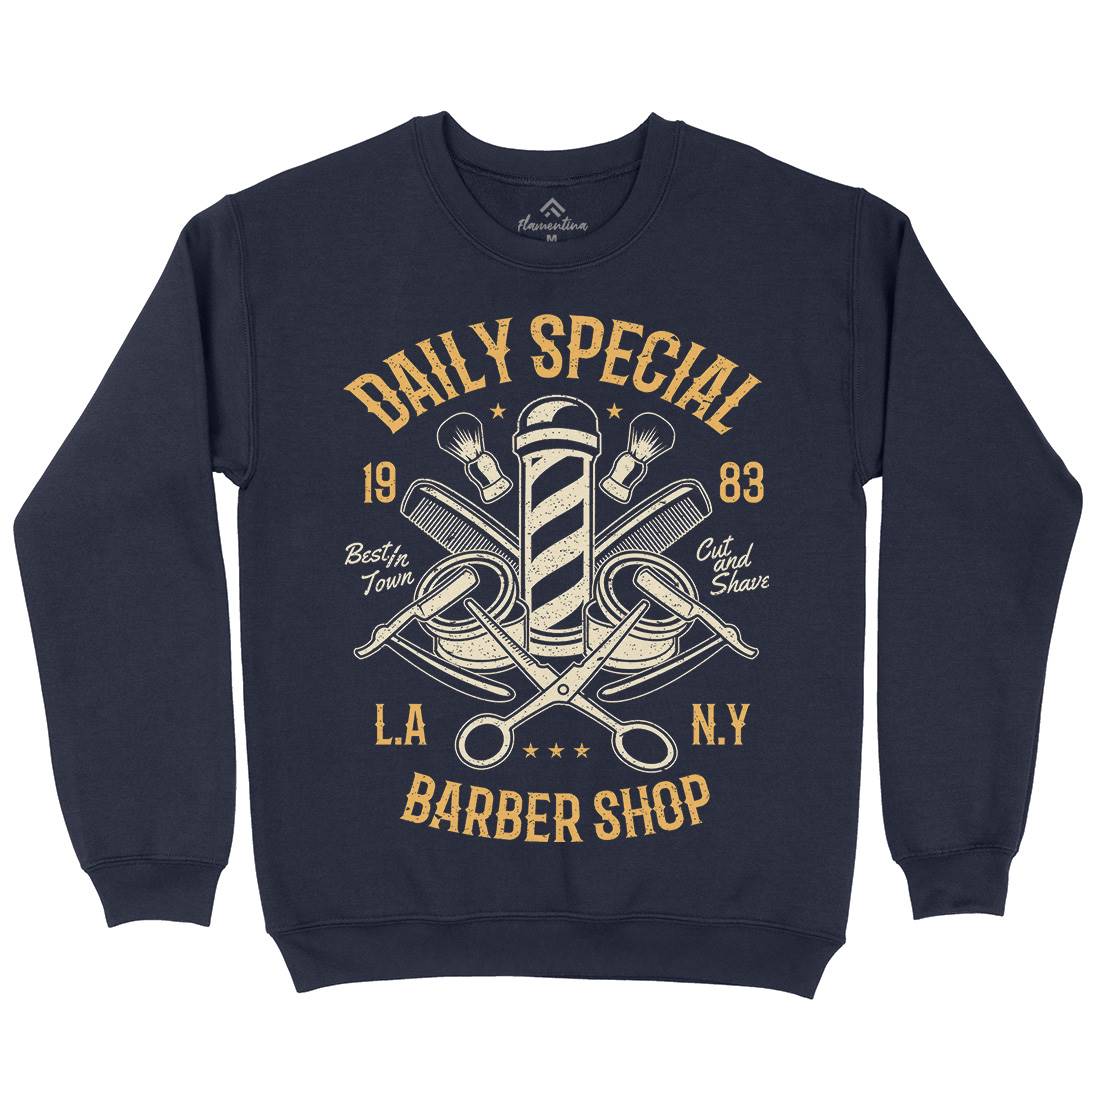 Daily Special Shop Kids Crew Neck Sweatshirt Barber A041